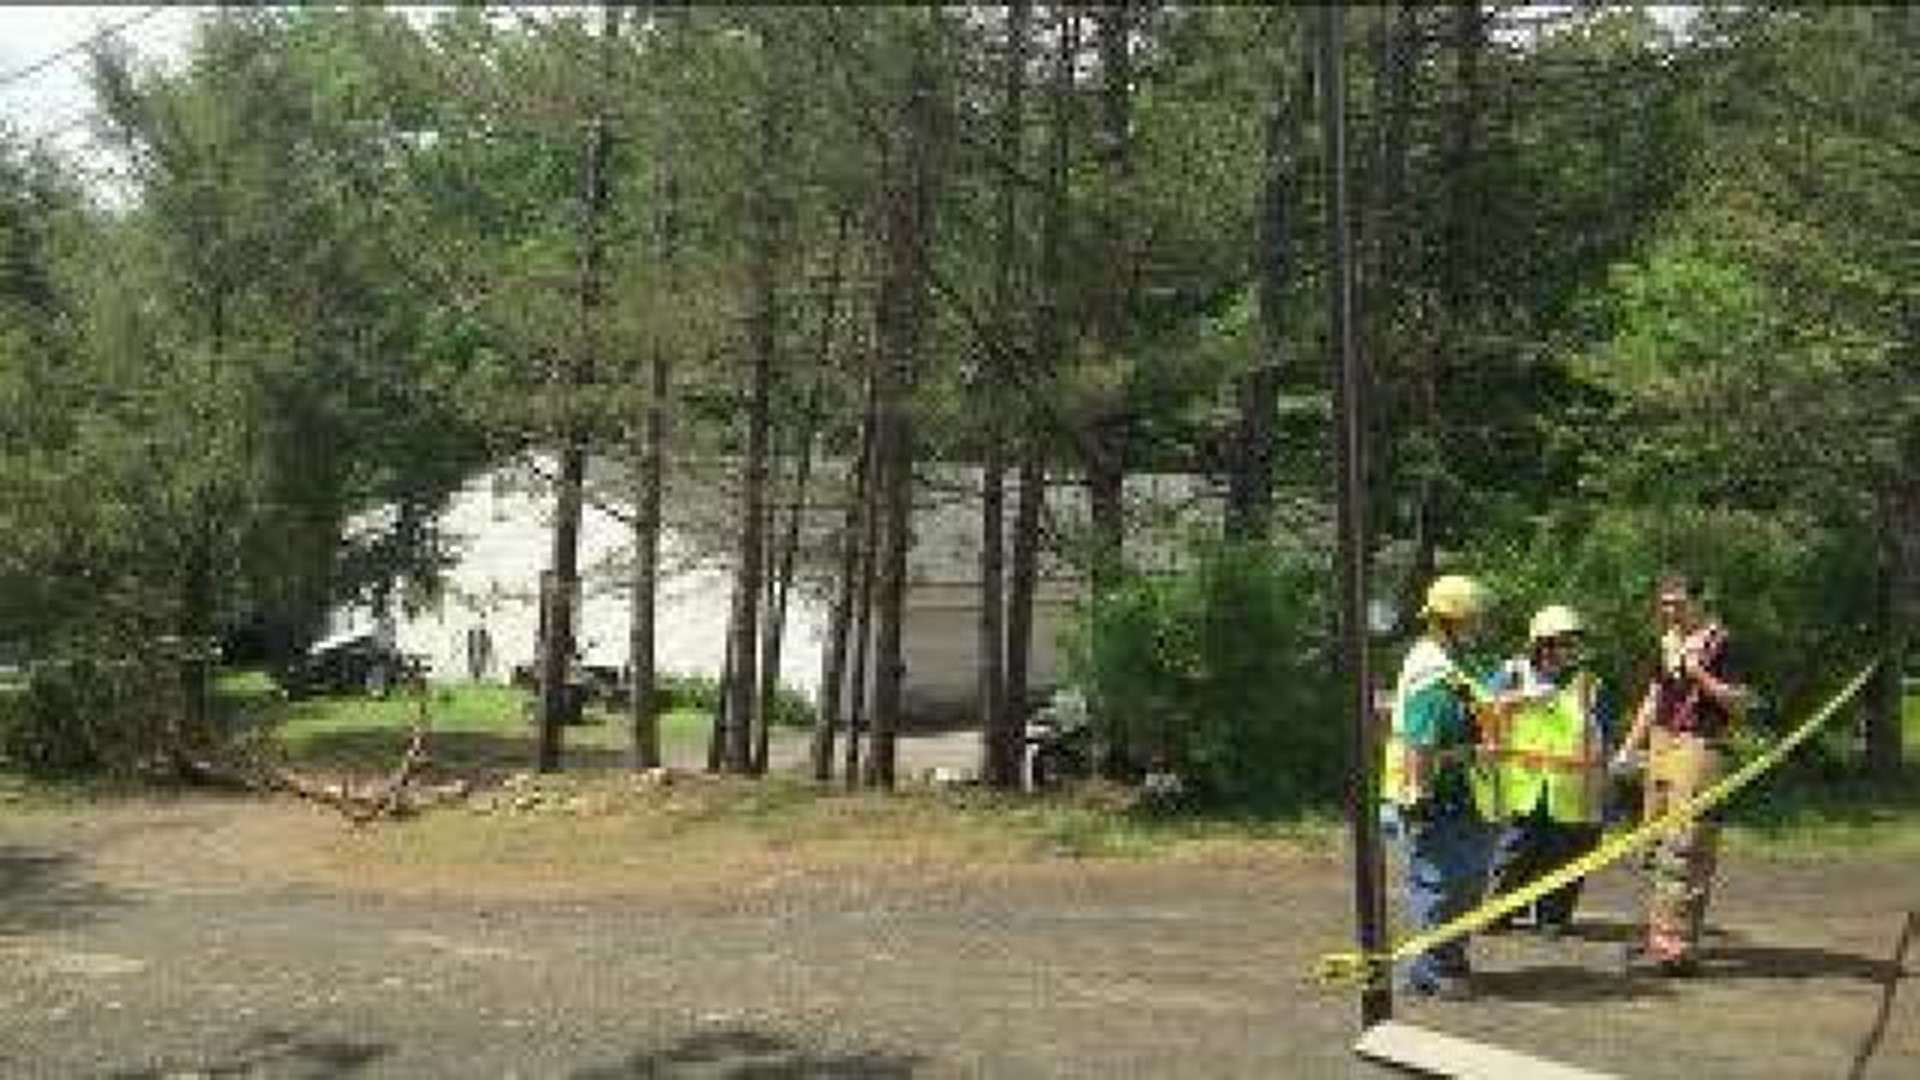 Coroner Called to Scene of Fire in Schuylkill County